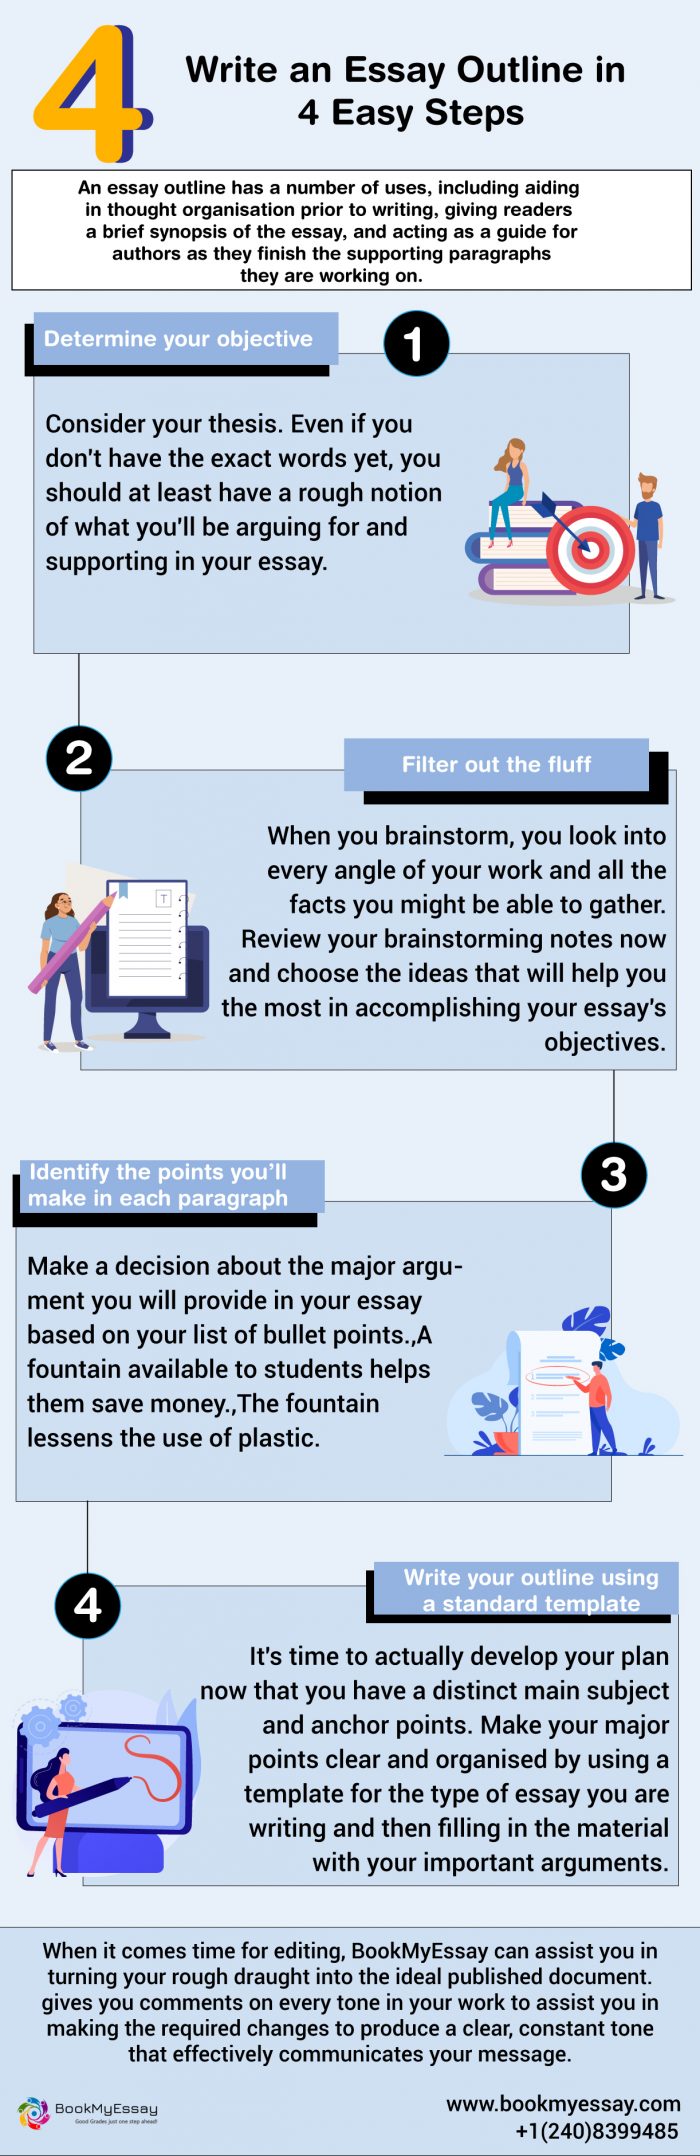 Write an Essay Outline in 4 Easy Steps